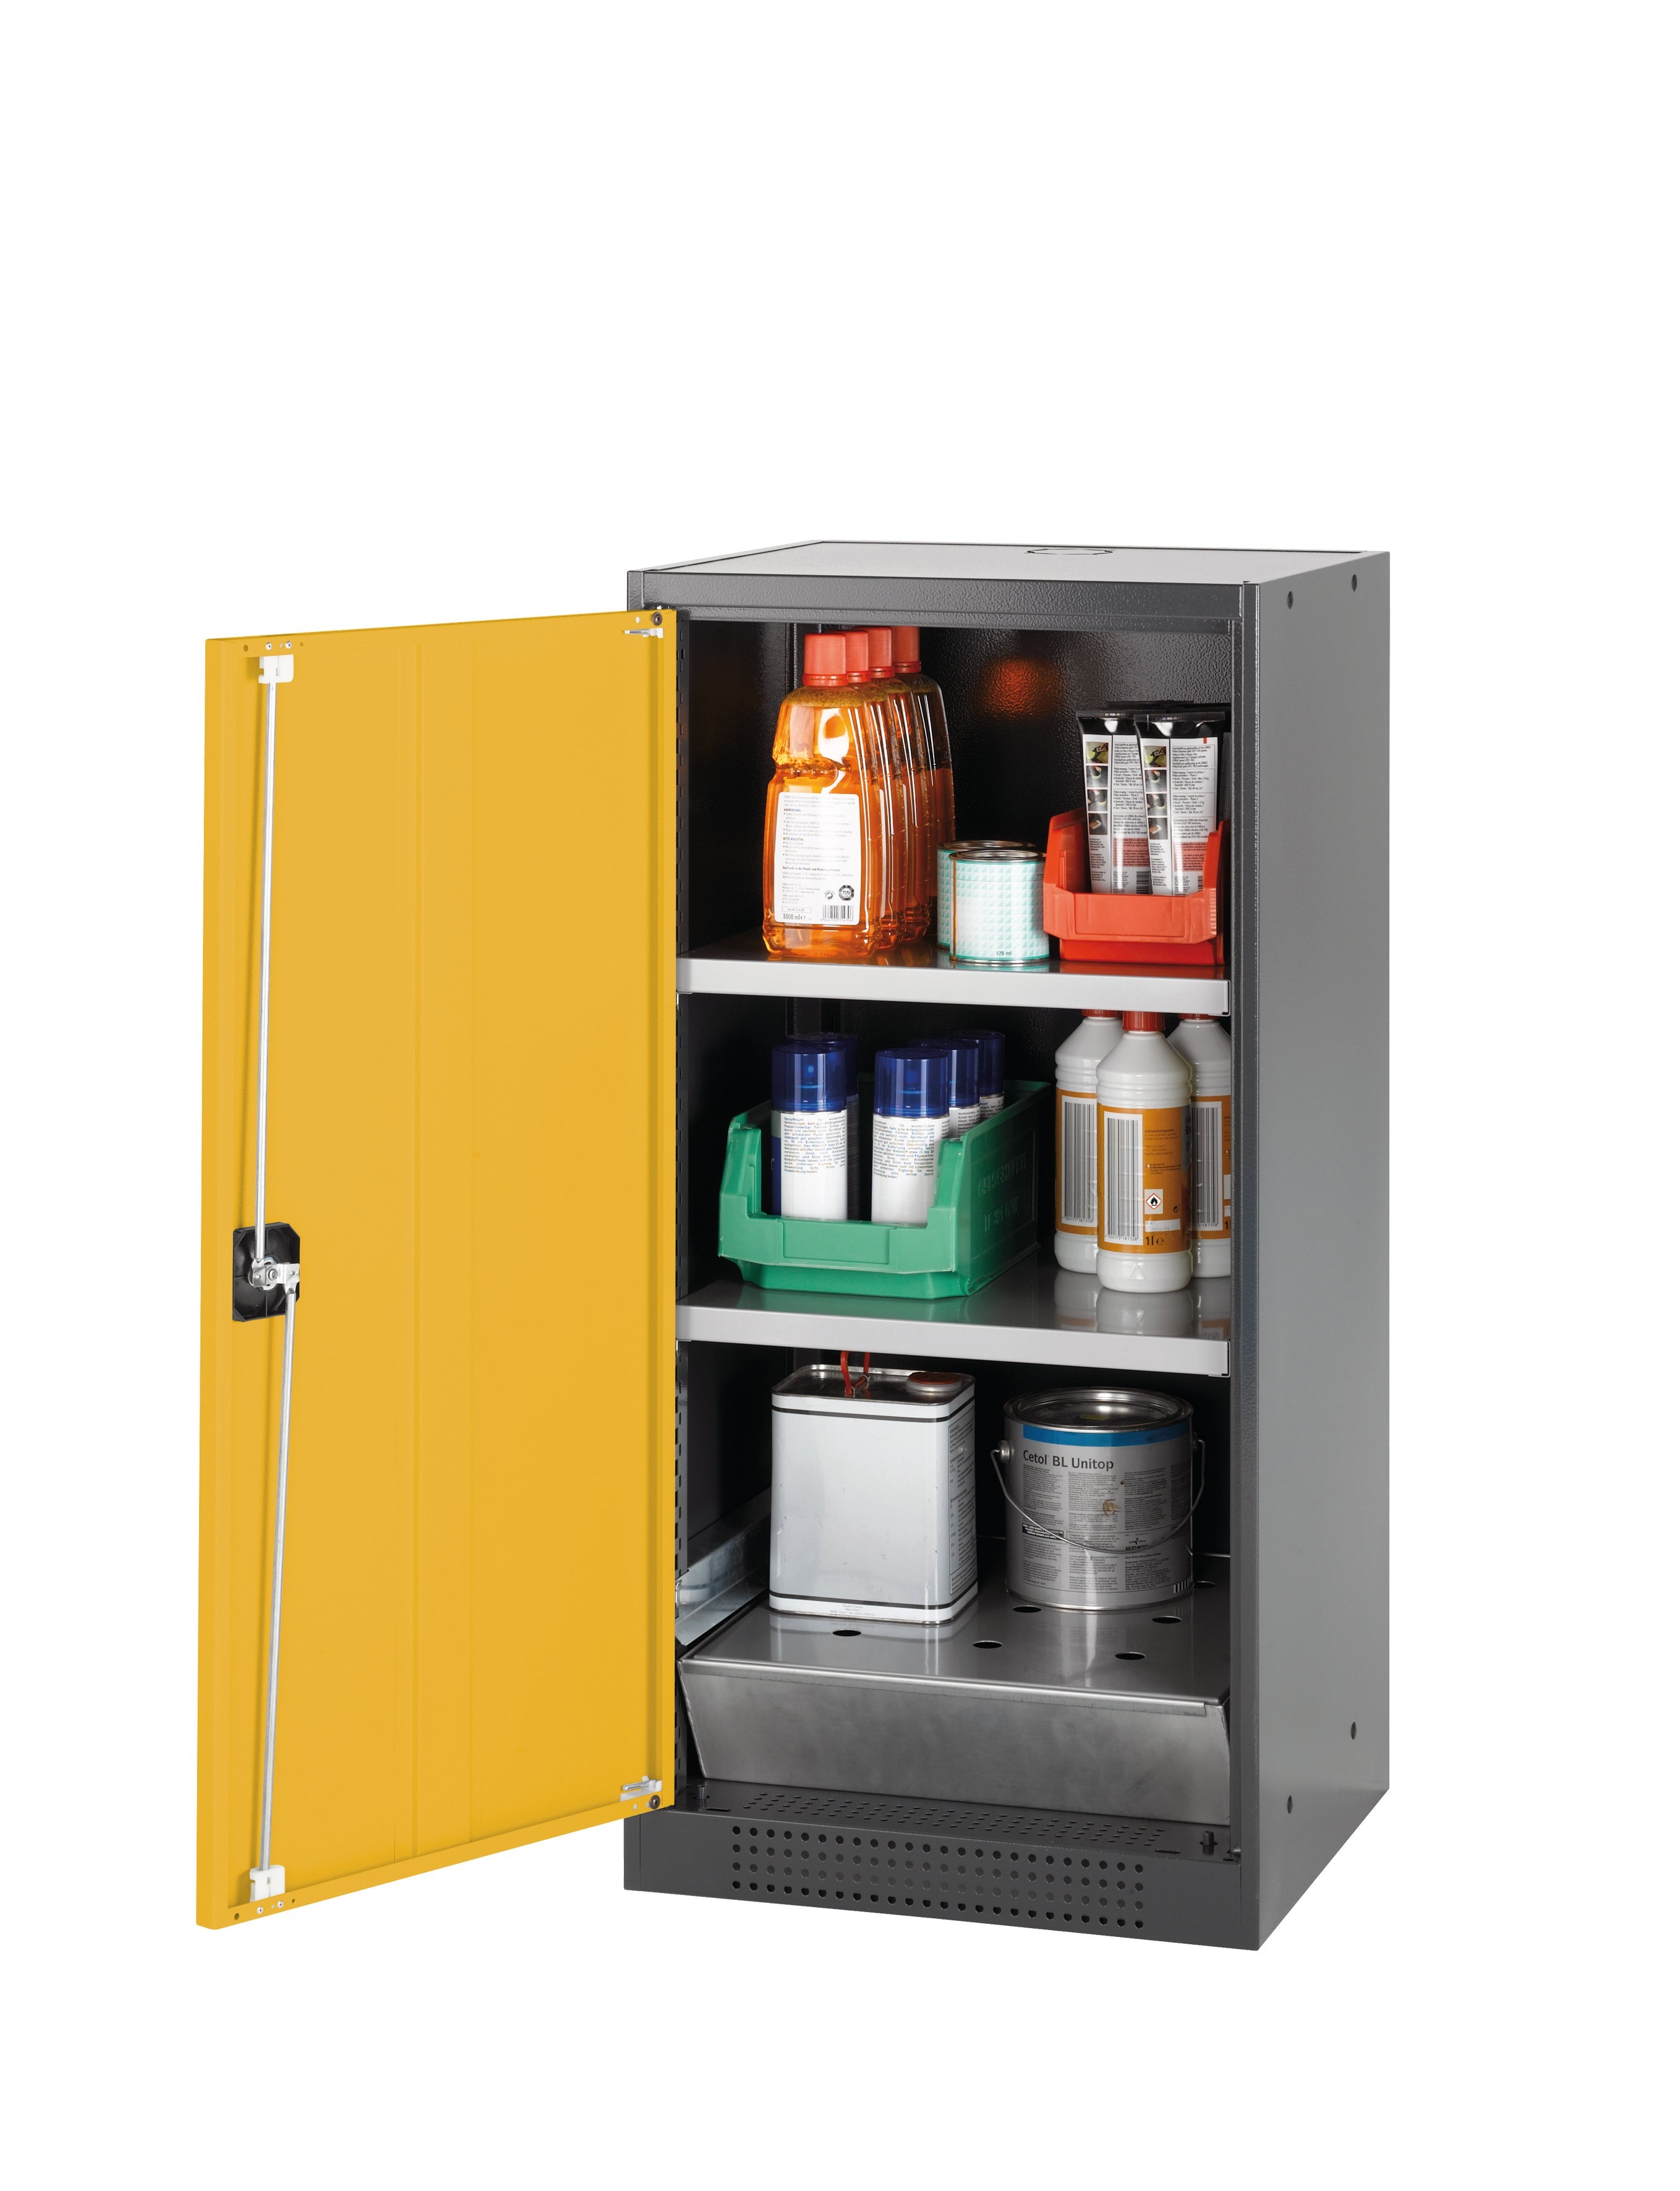 Chemical cabinet CS-CLASSIC model CS.110.054 in safety yellow RAL 1004 with 2x standard shelves (sheet steel)